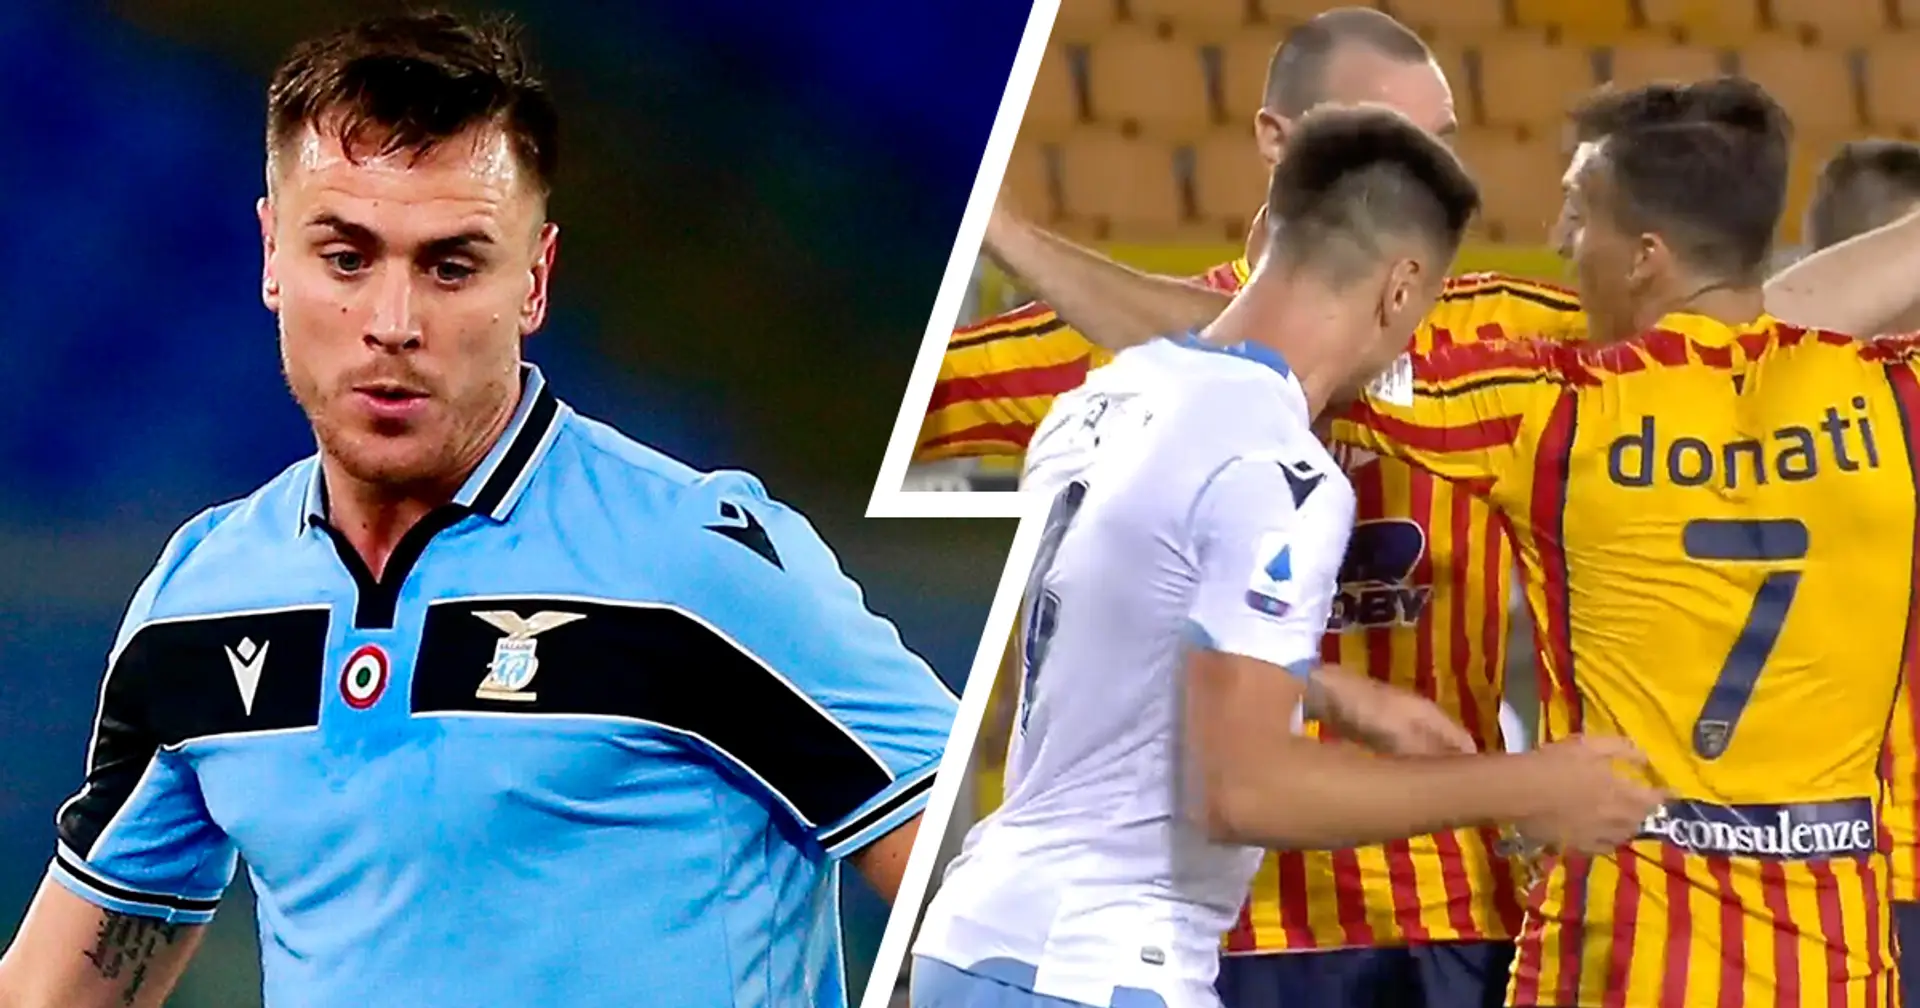 Lazio defender Patric banned for 4 games and fined €10,000 for biting